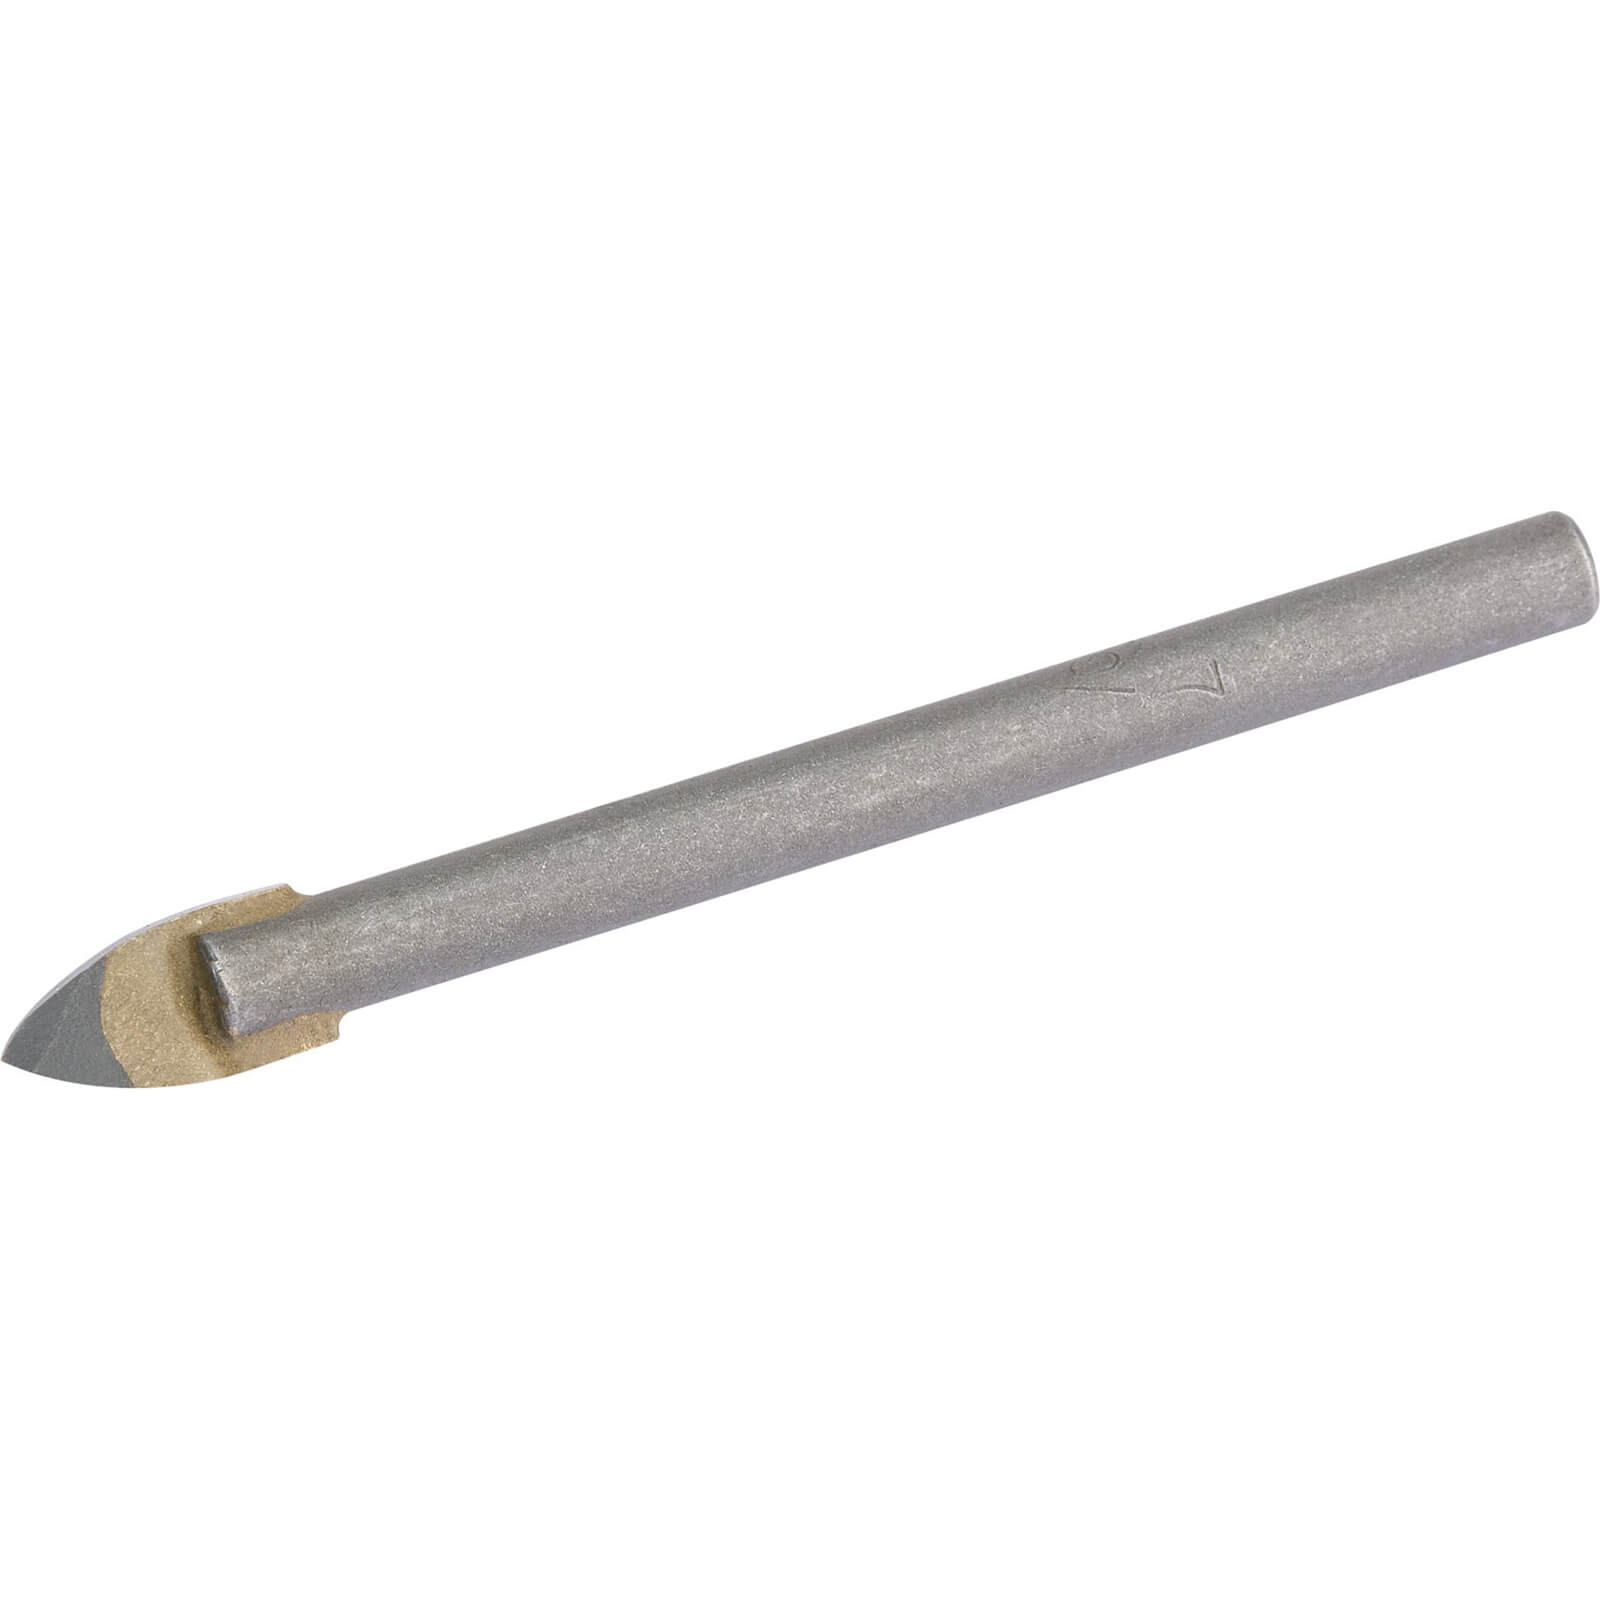 Image of Draper Expert Tile and Glass Drill Bit 7mm